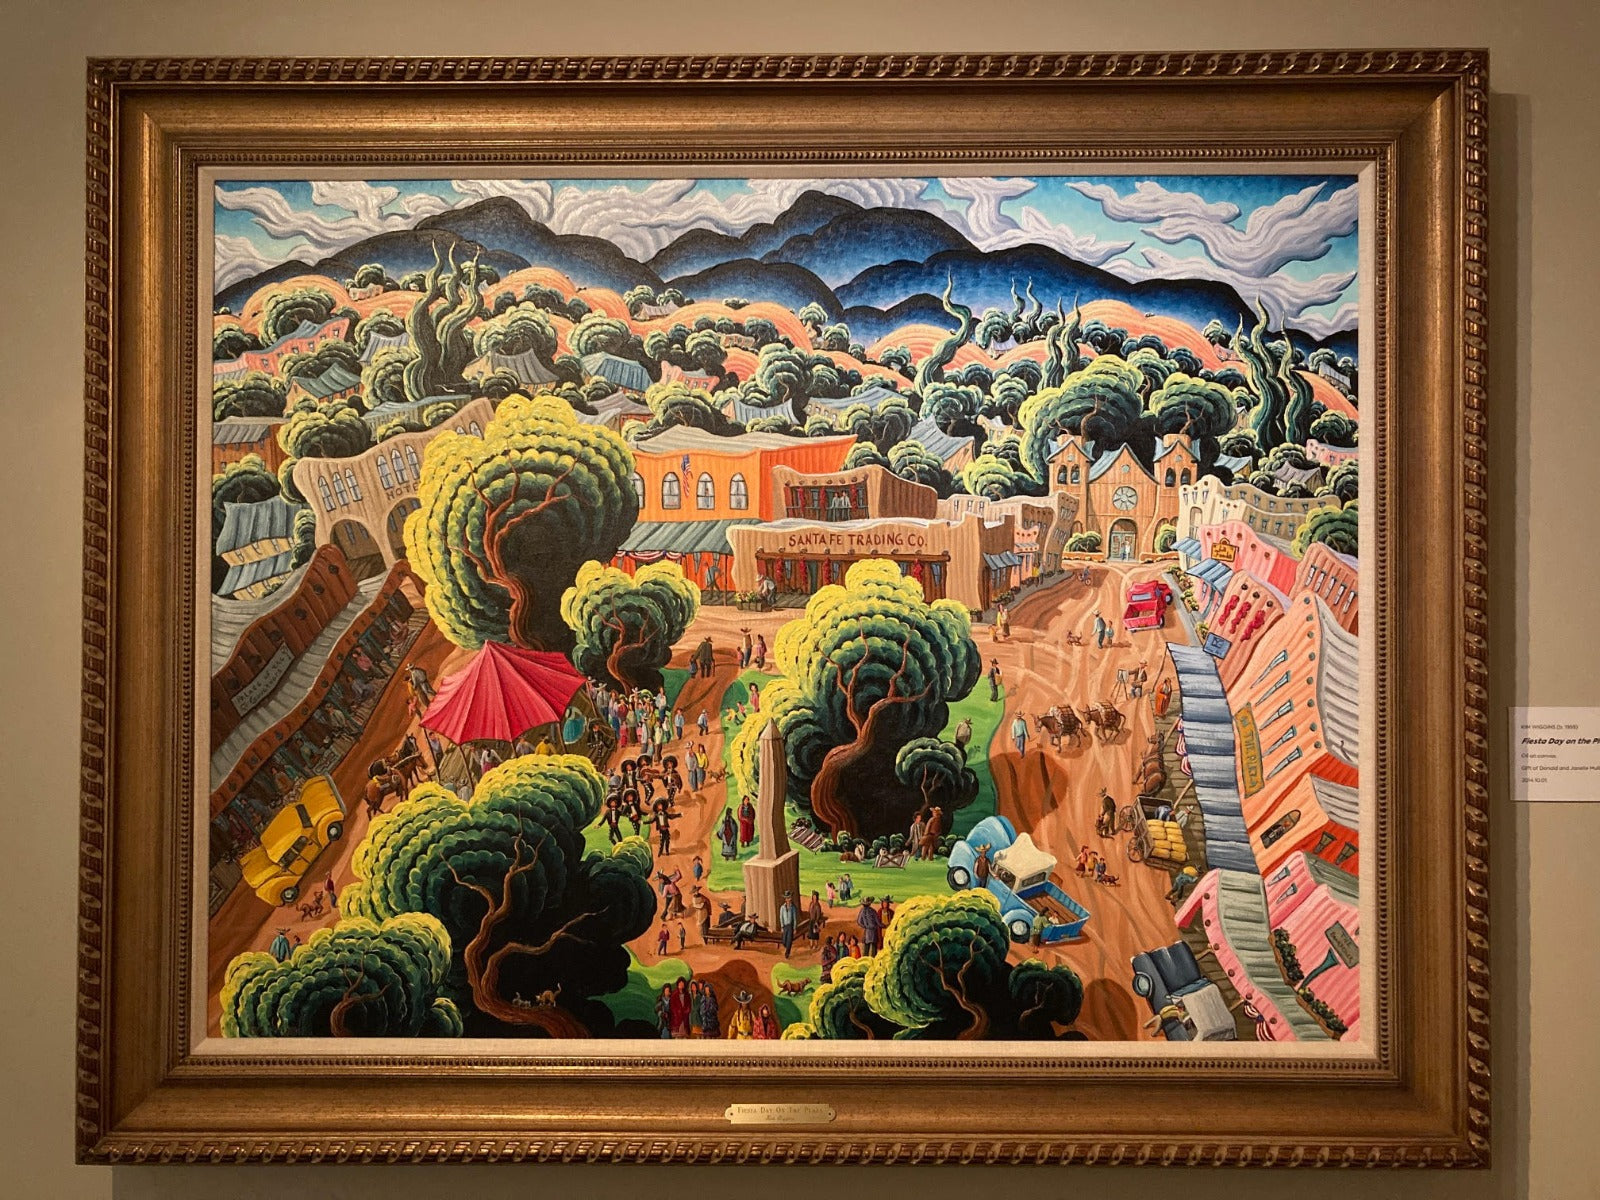 Kim Wiggins, Fiesta Day on the Plaza, 2003. Oil on canvas. Briscoe Museum of Western Art